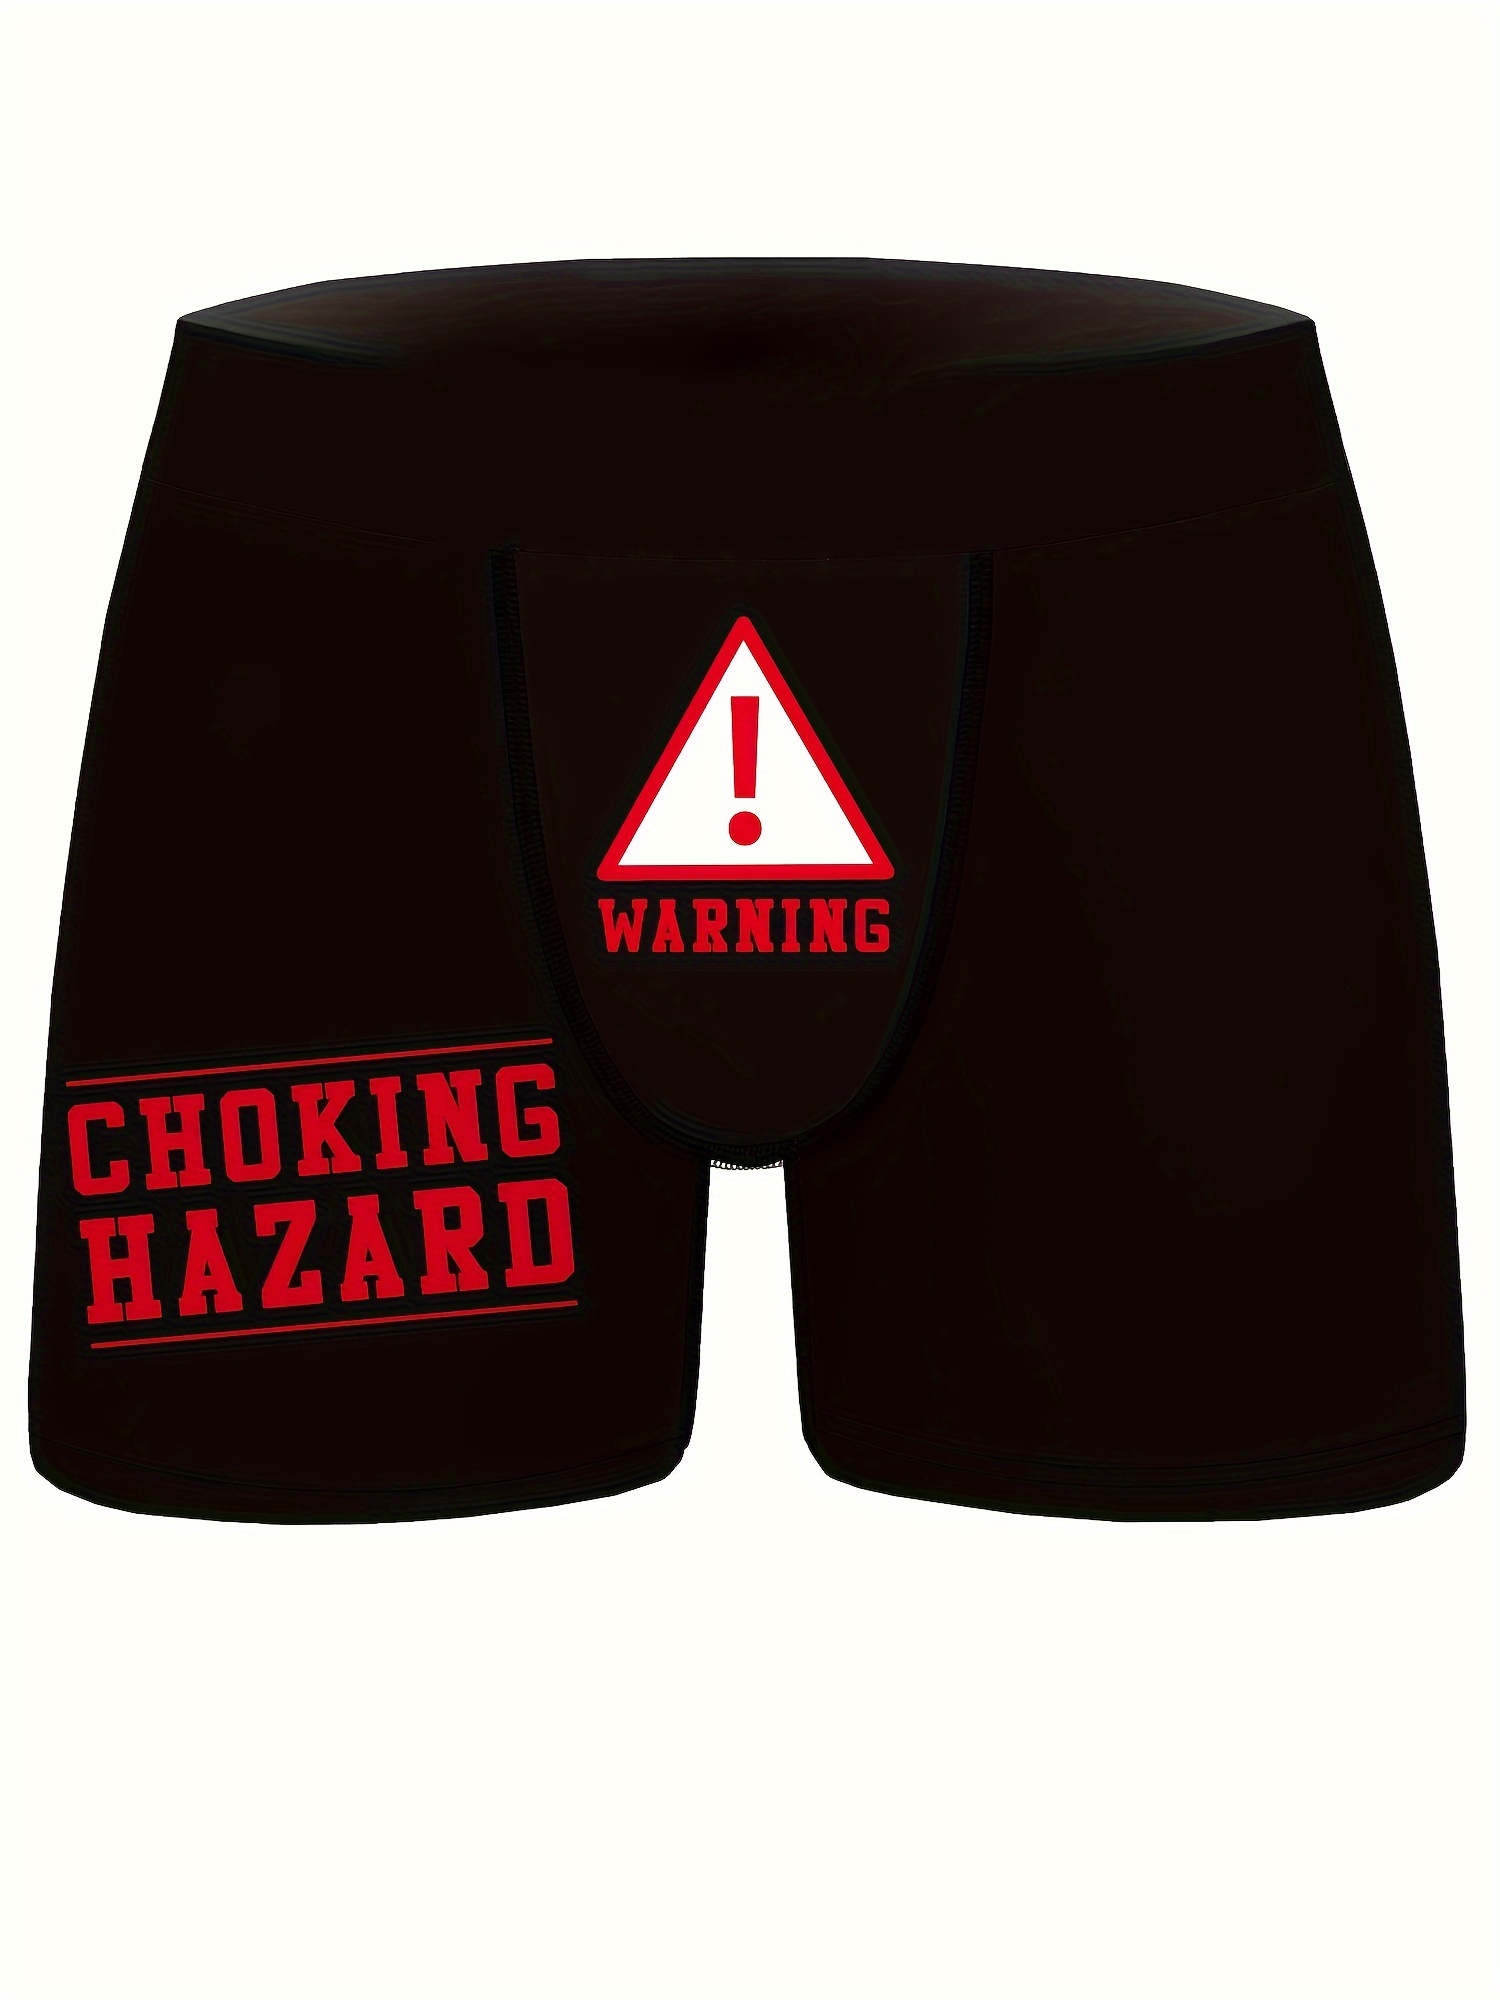 Mens Stop Staring At My Elephant Boxer Briefs Funny Animal